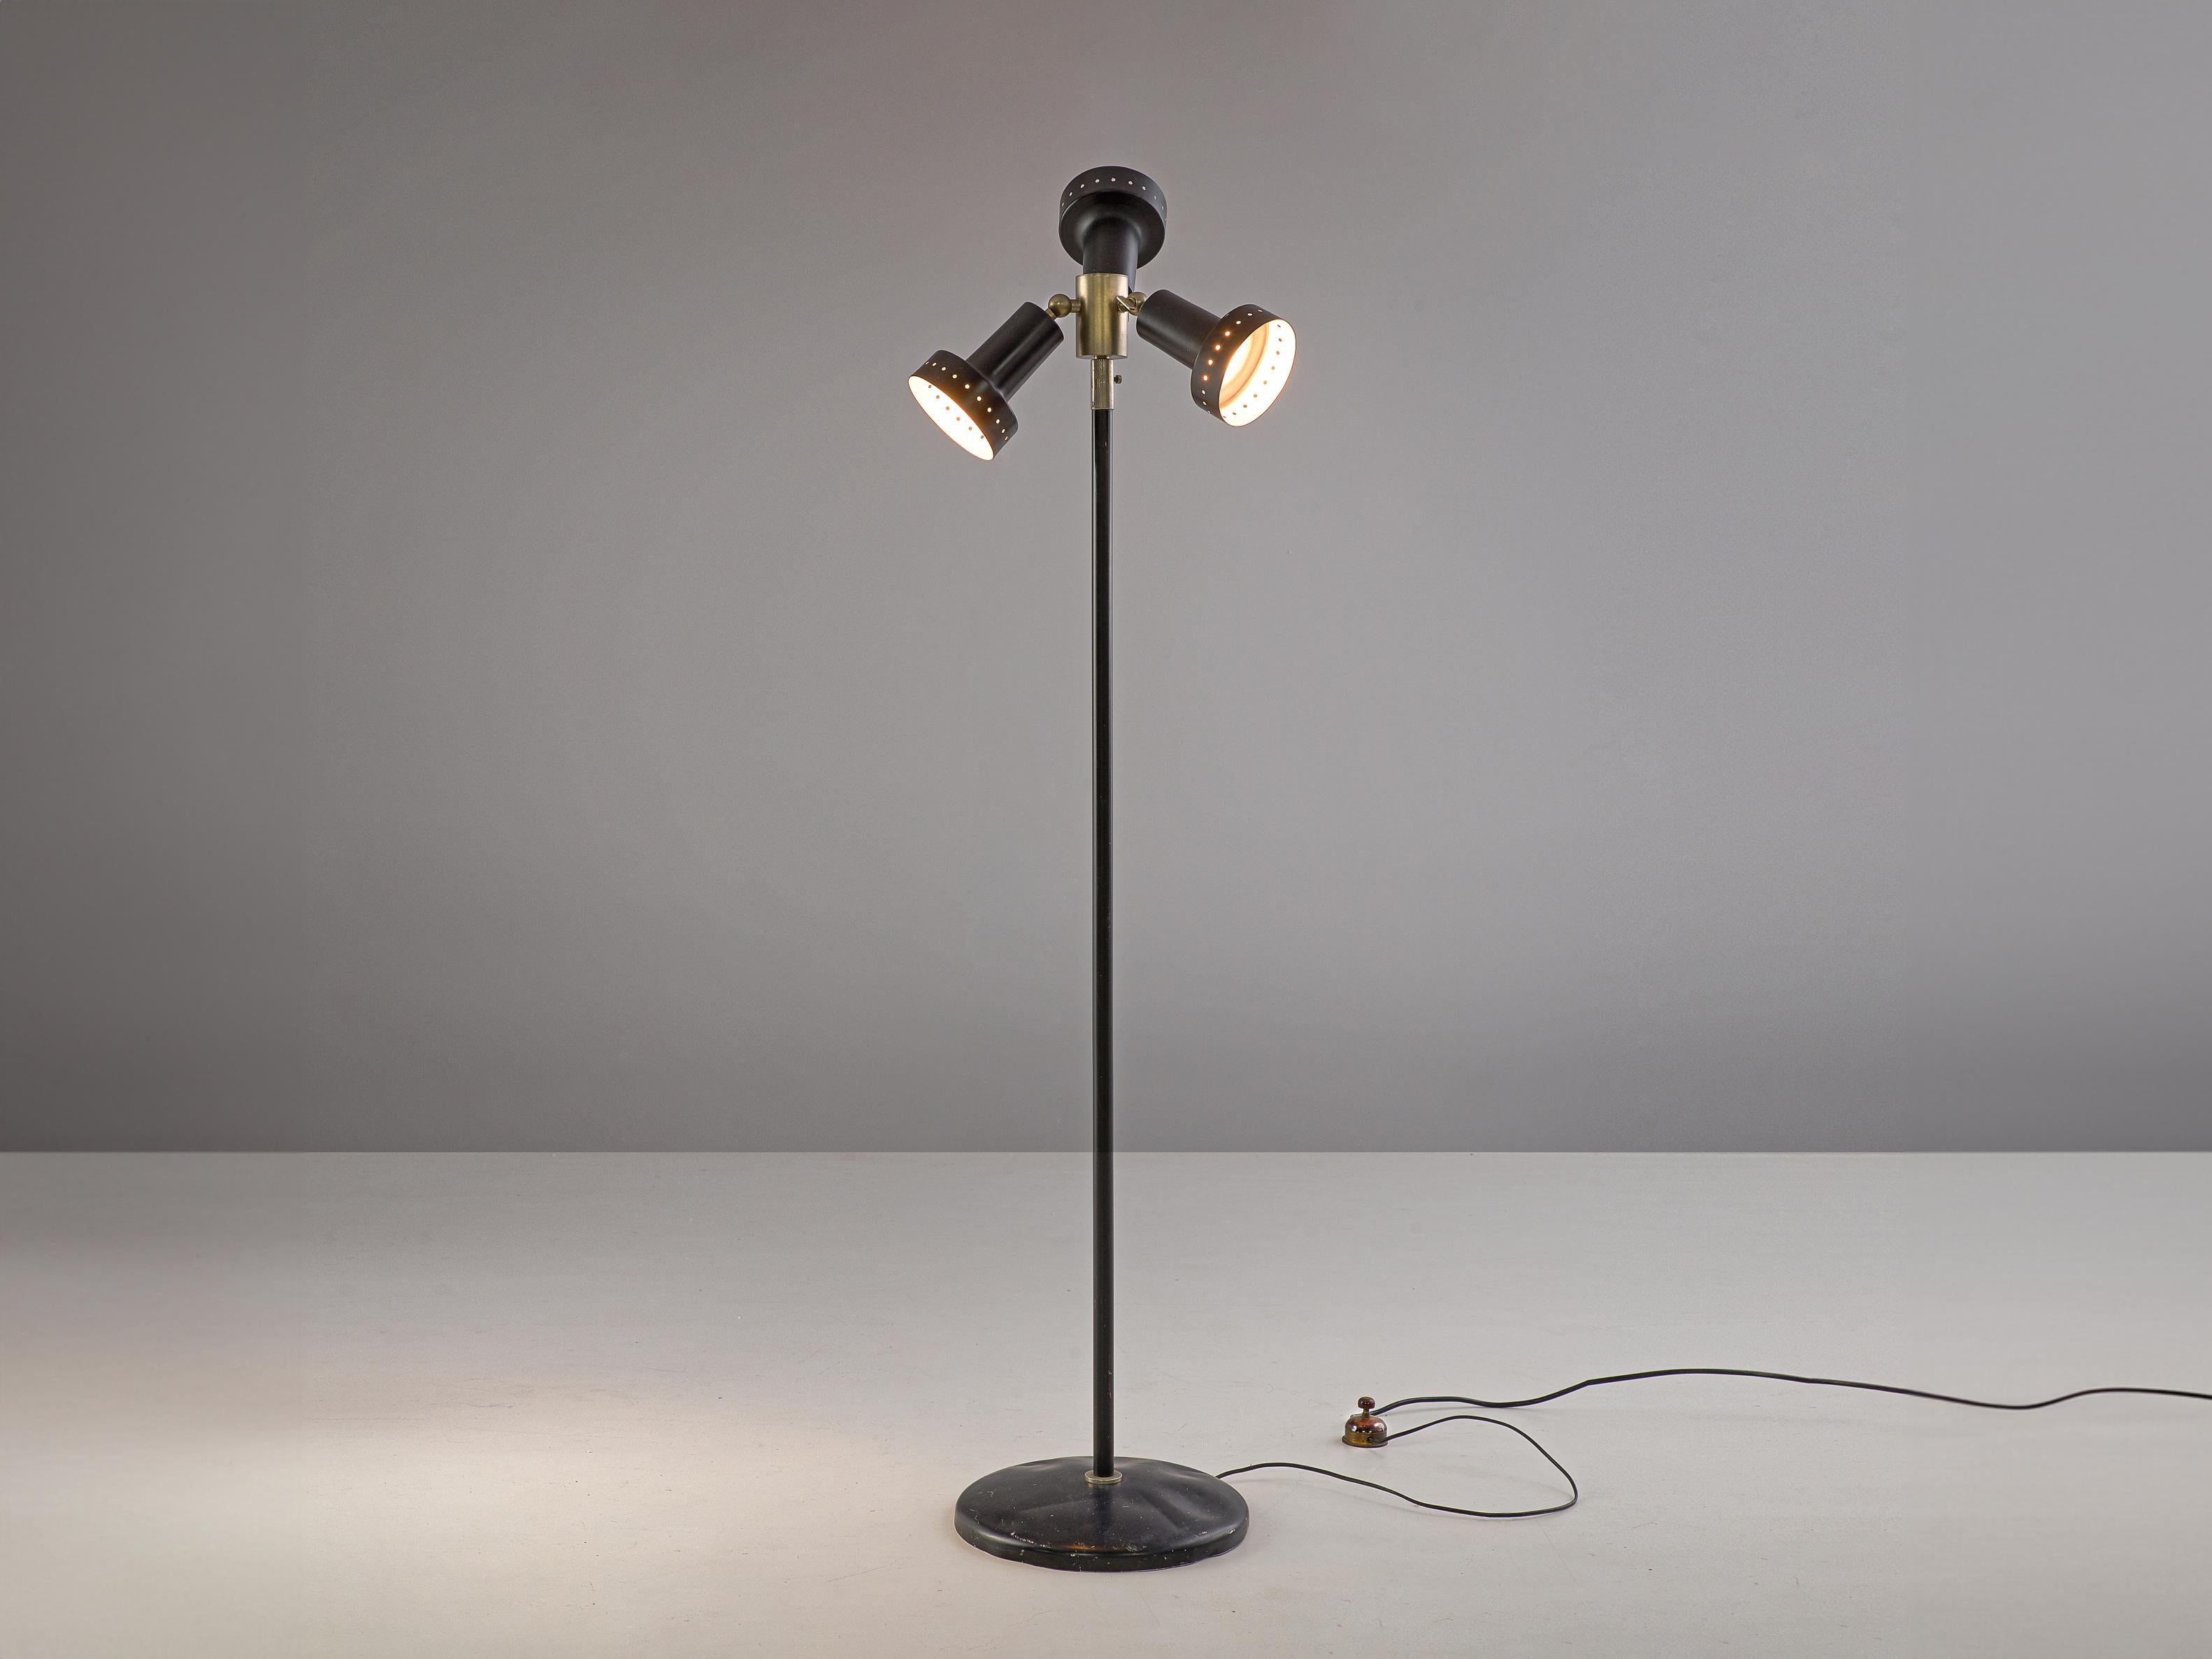 Floor lamp, nickel-plated brass, coated metal, Italy, 1960s

This elegant floor lamp originates from Italy and is a striking blend of grace and industrial style. The design features three black coated shades that can be adjusted in their angle. The